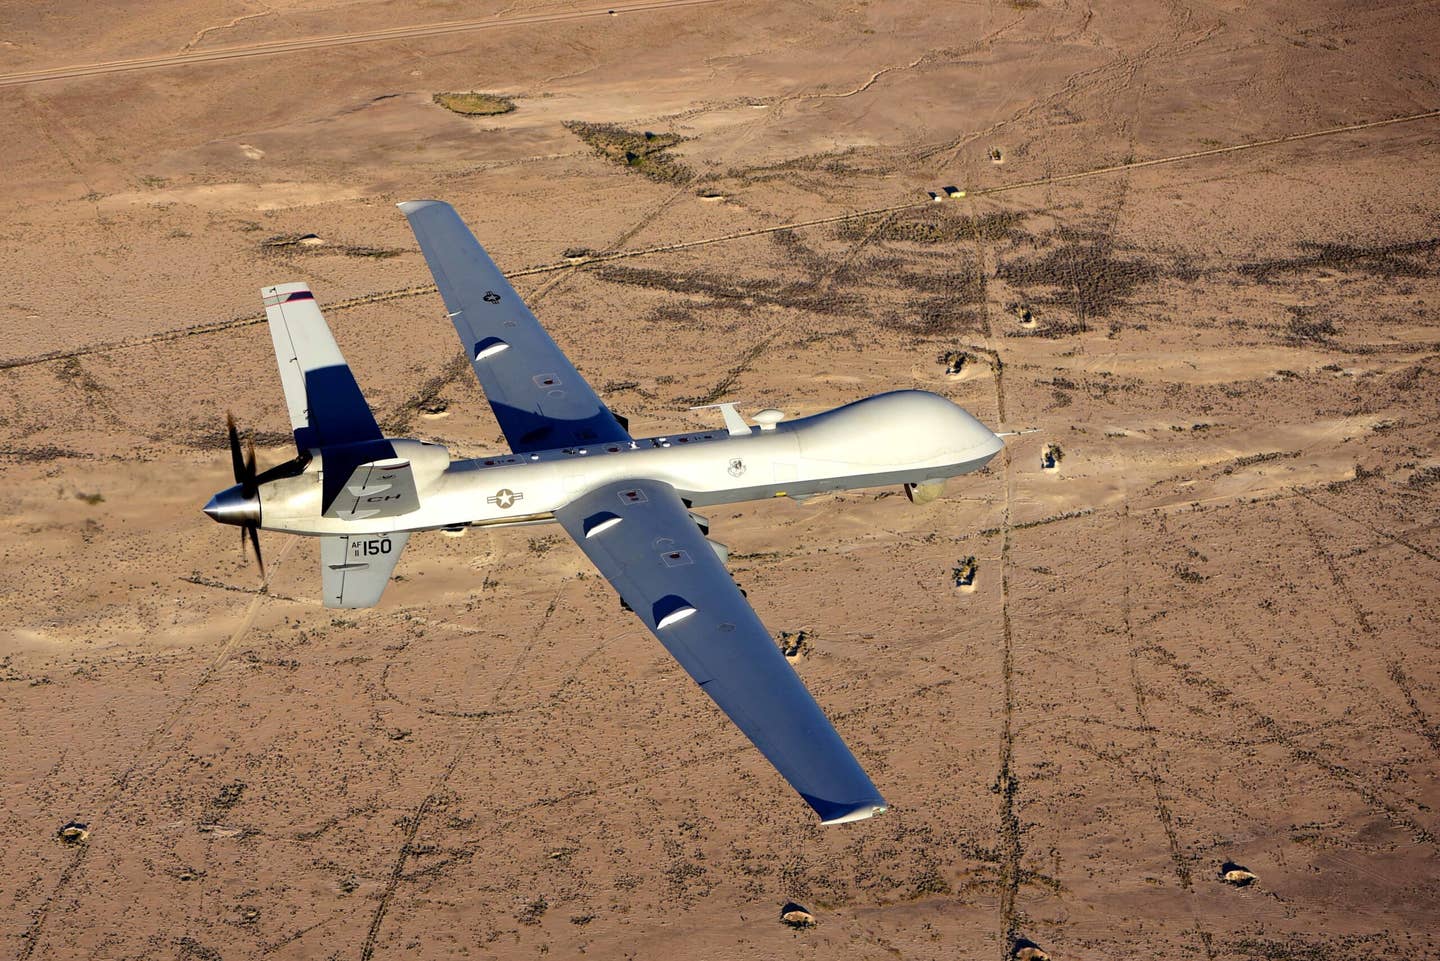 An MQ-9 Reaper flies a training mission over the Nevada Test and Training Range, July 15, 2019. <em>Credit: U.S. Air Force photo by Airman 1st Class William Rio Rosado</em>